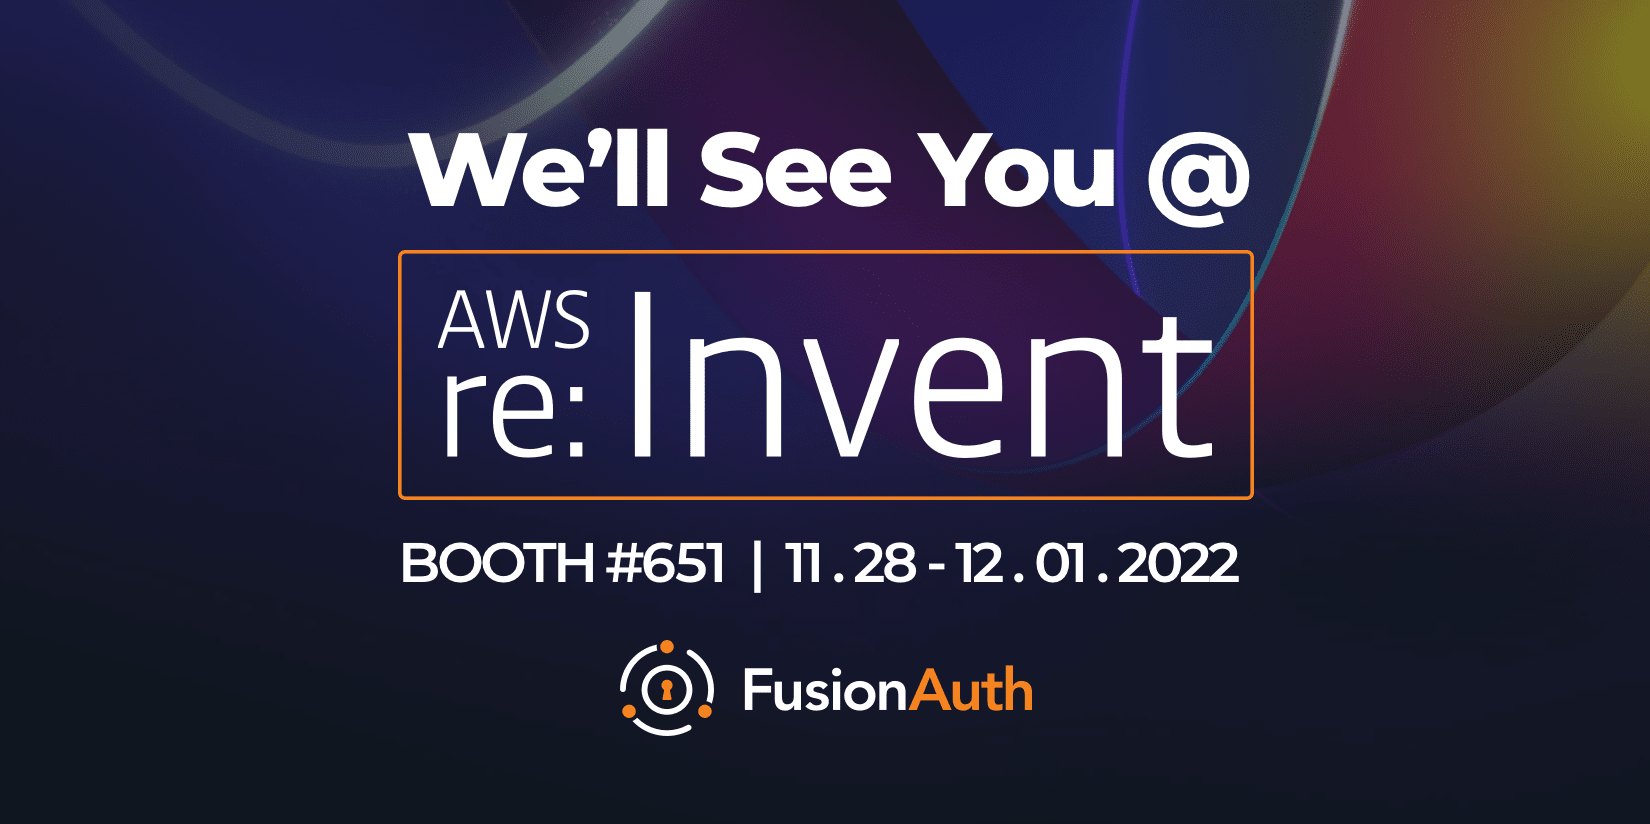 We'll see you at AWS re:Invent 2022